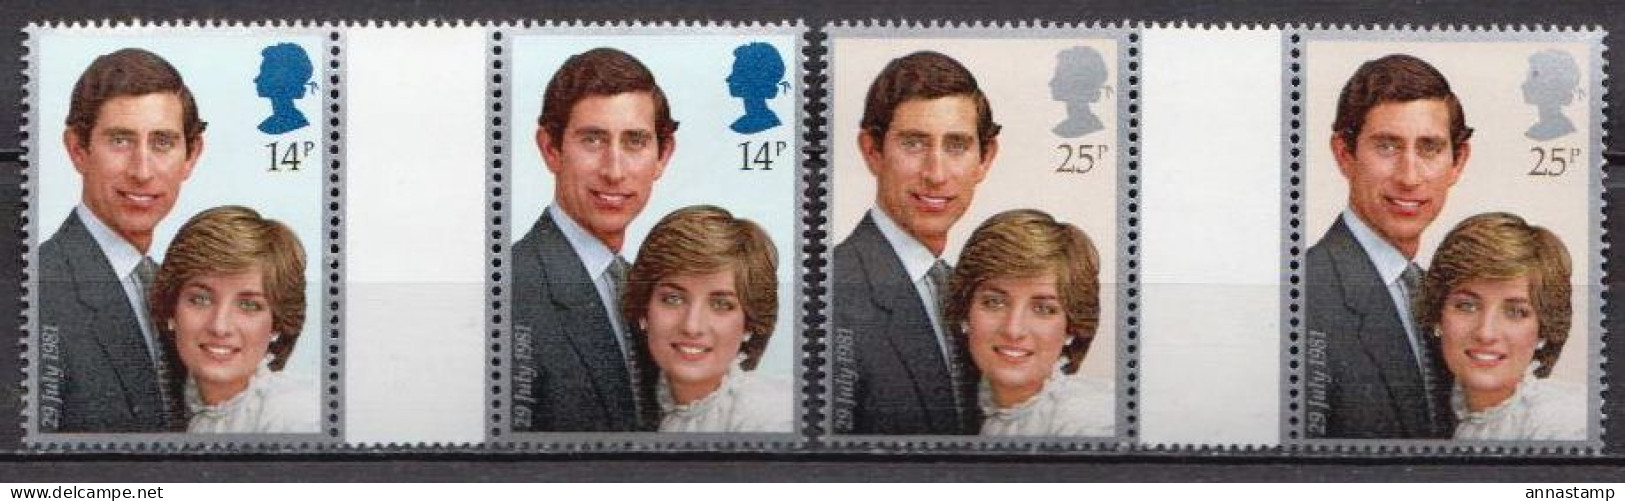 Great Britain MNH Set In Gutter Pairs - Royalties, Royals